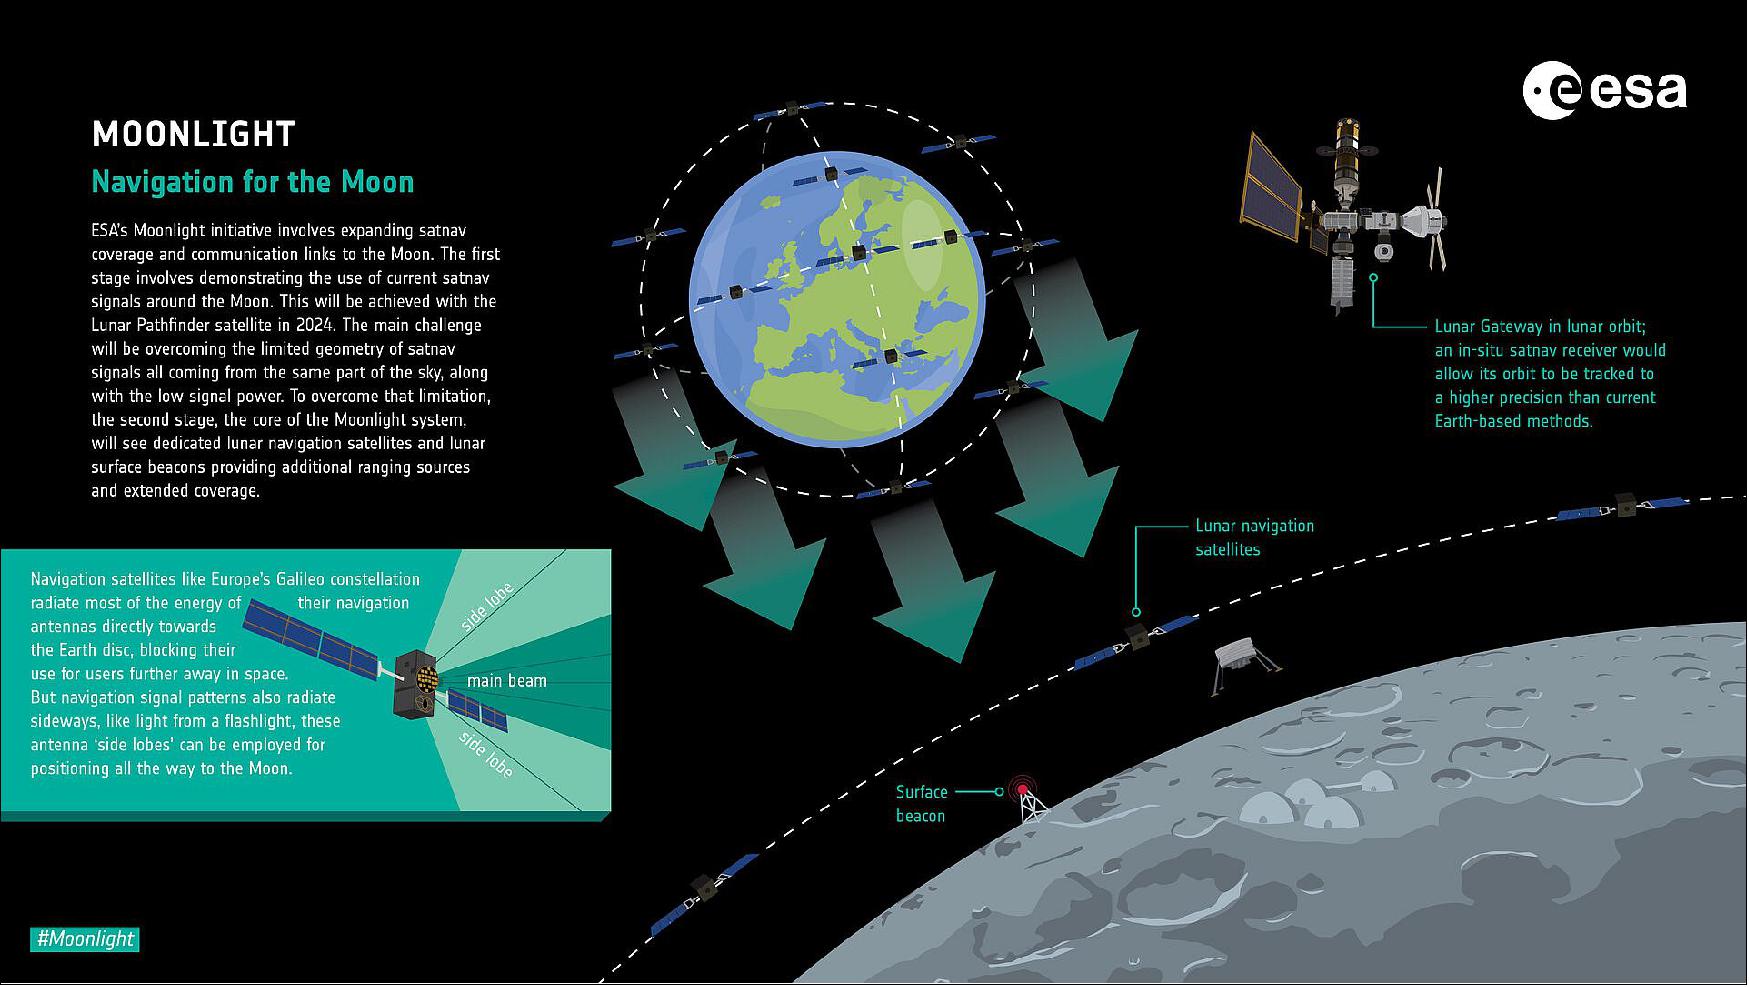 Figure 3: ESA's Moonlight initiative involves expanding satnav coverage and communication links to the Moon. The first stage involves demonstrating the use of current satnav signals around the Moon. This will be achieved with the Lunar Pathfinder satellite in 2024. The main challenge will be overcoming the limited geometry of satnav signals all coming from the same part of the sky, along with the low signal power. To overcome that limitation, the second stage, the core of the Moonlight system, will see dedicated lunar navigation satellites and lunar surface beacons providing additional ranging sources and extended coverage (image credit: ESA, K. Oldenburg) 3)